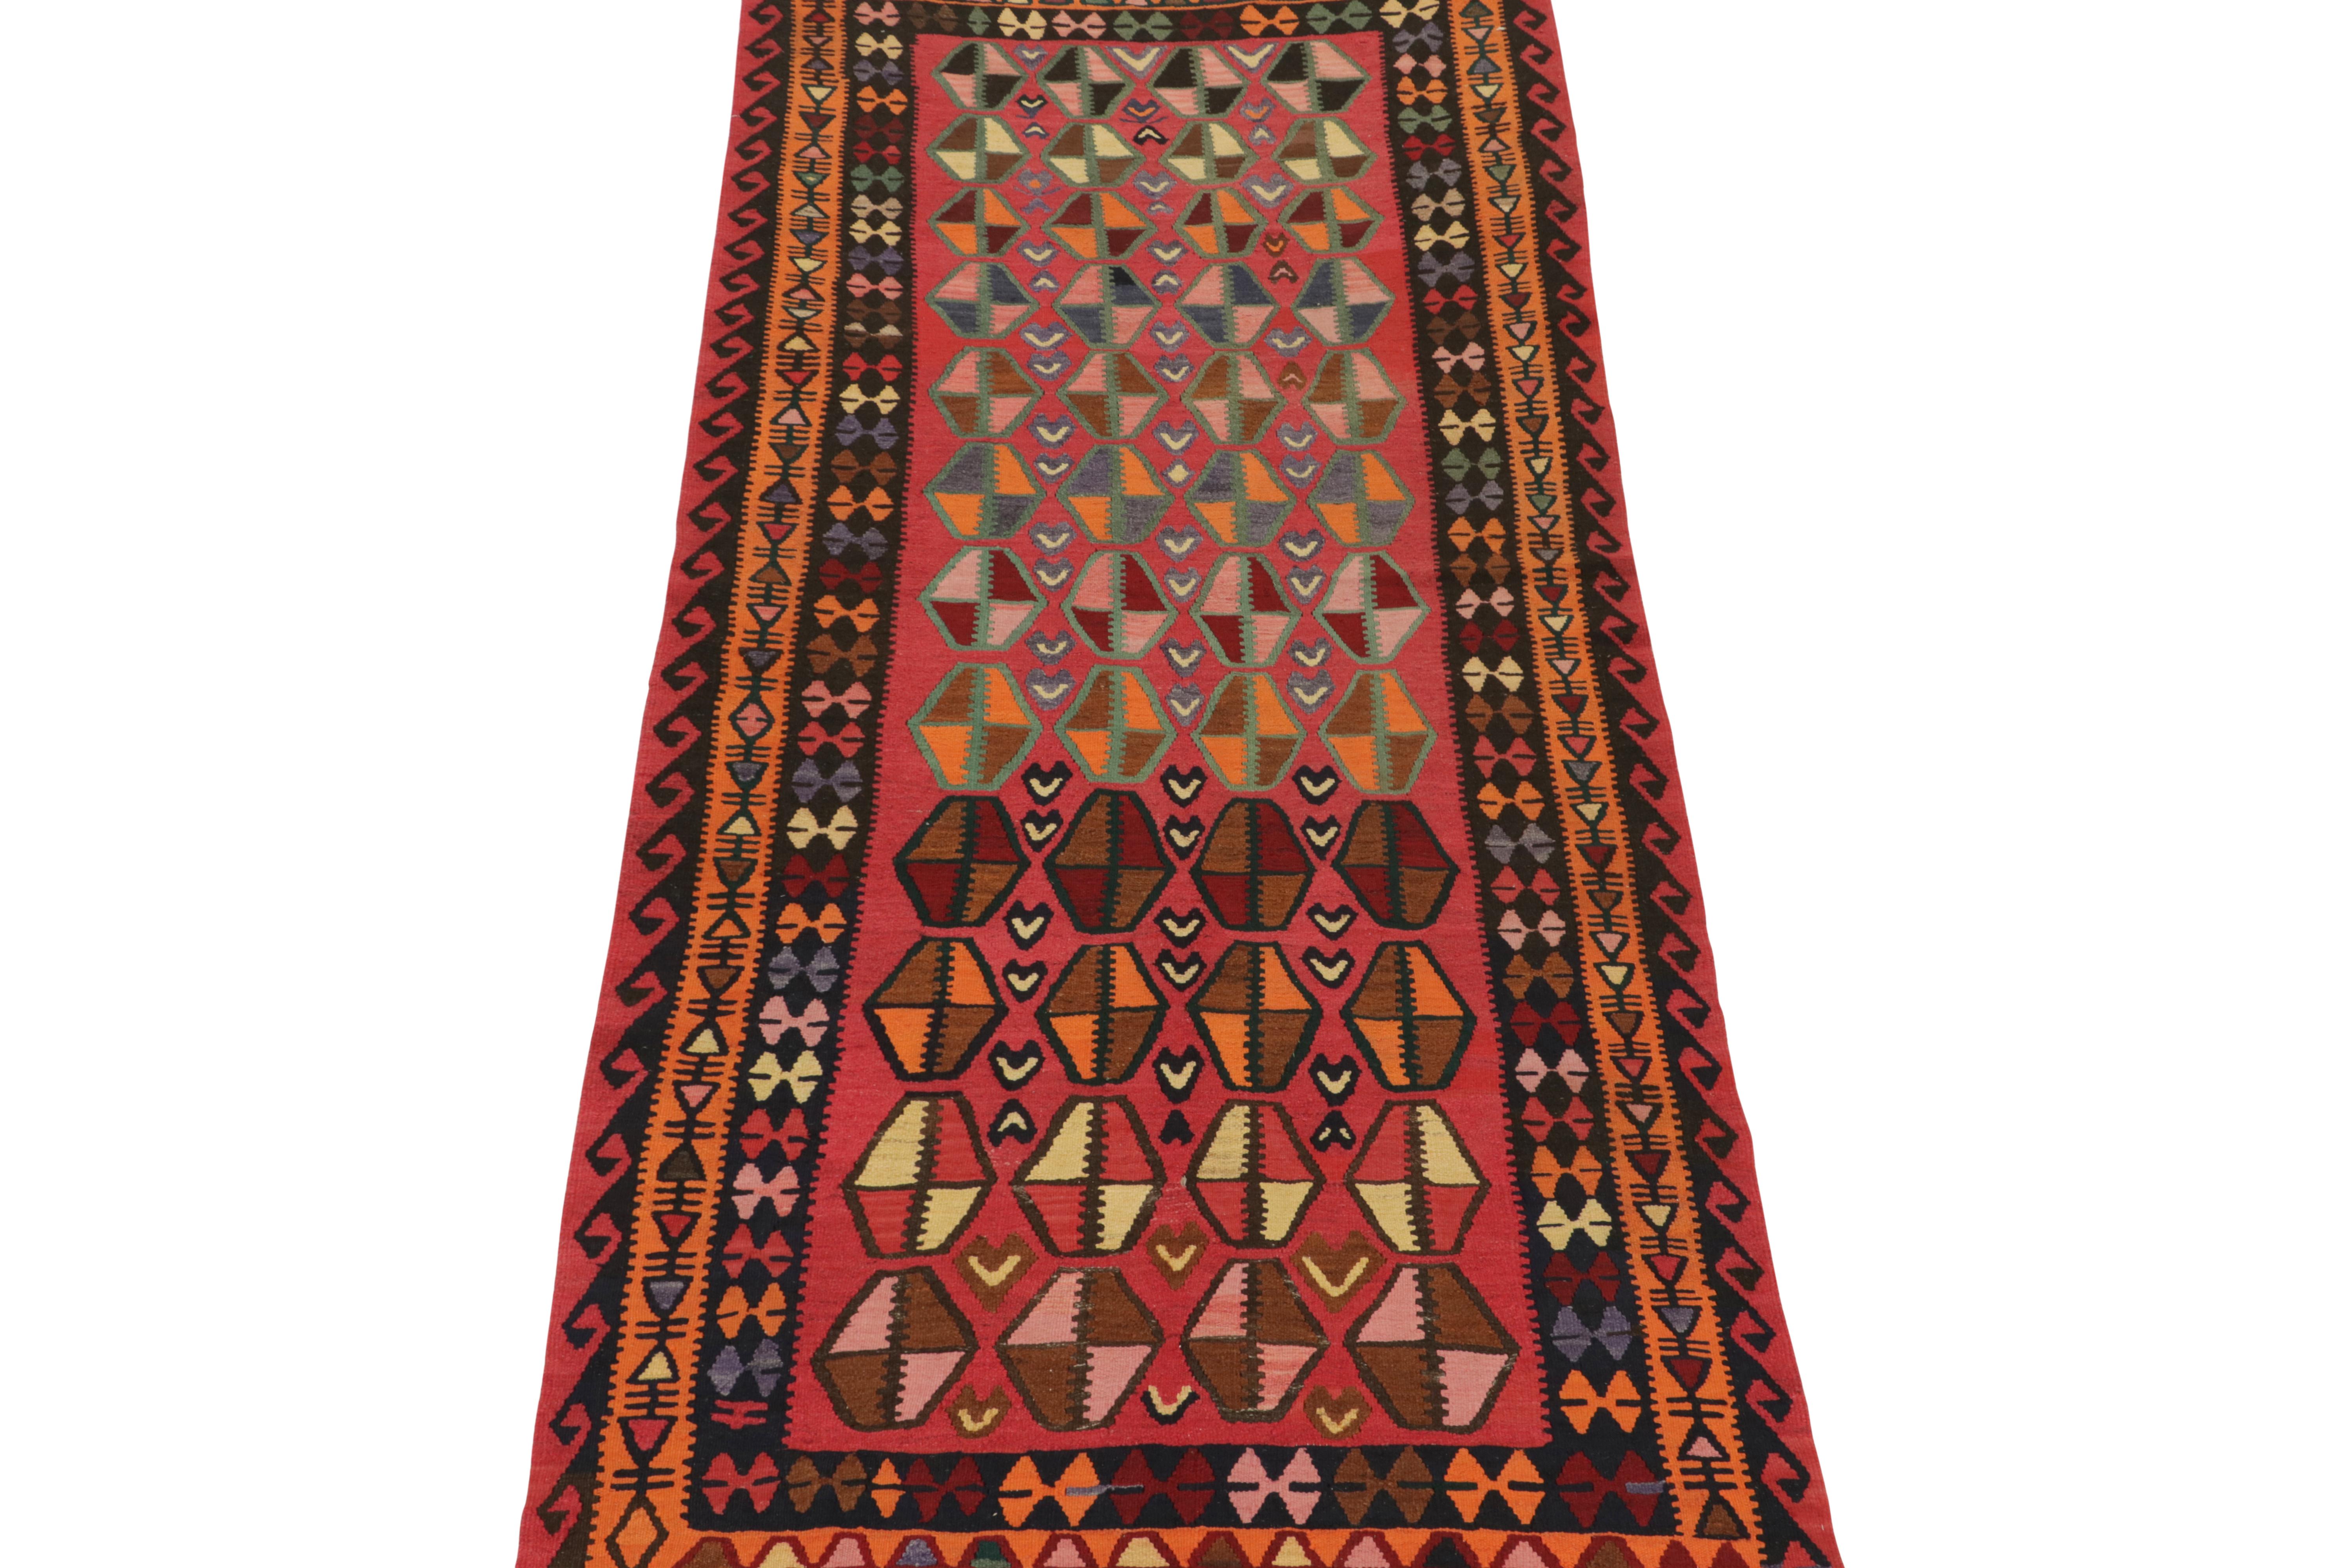 This vintage 5x11 Persian Kilim is a unique tribal rug for its period that hails from Northwest provenance. Handwoven in wool, it’s believed to originate from Azerbaijan in the mid-century, circa 1950-1960.

Further on the Design:

The field